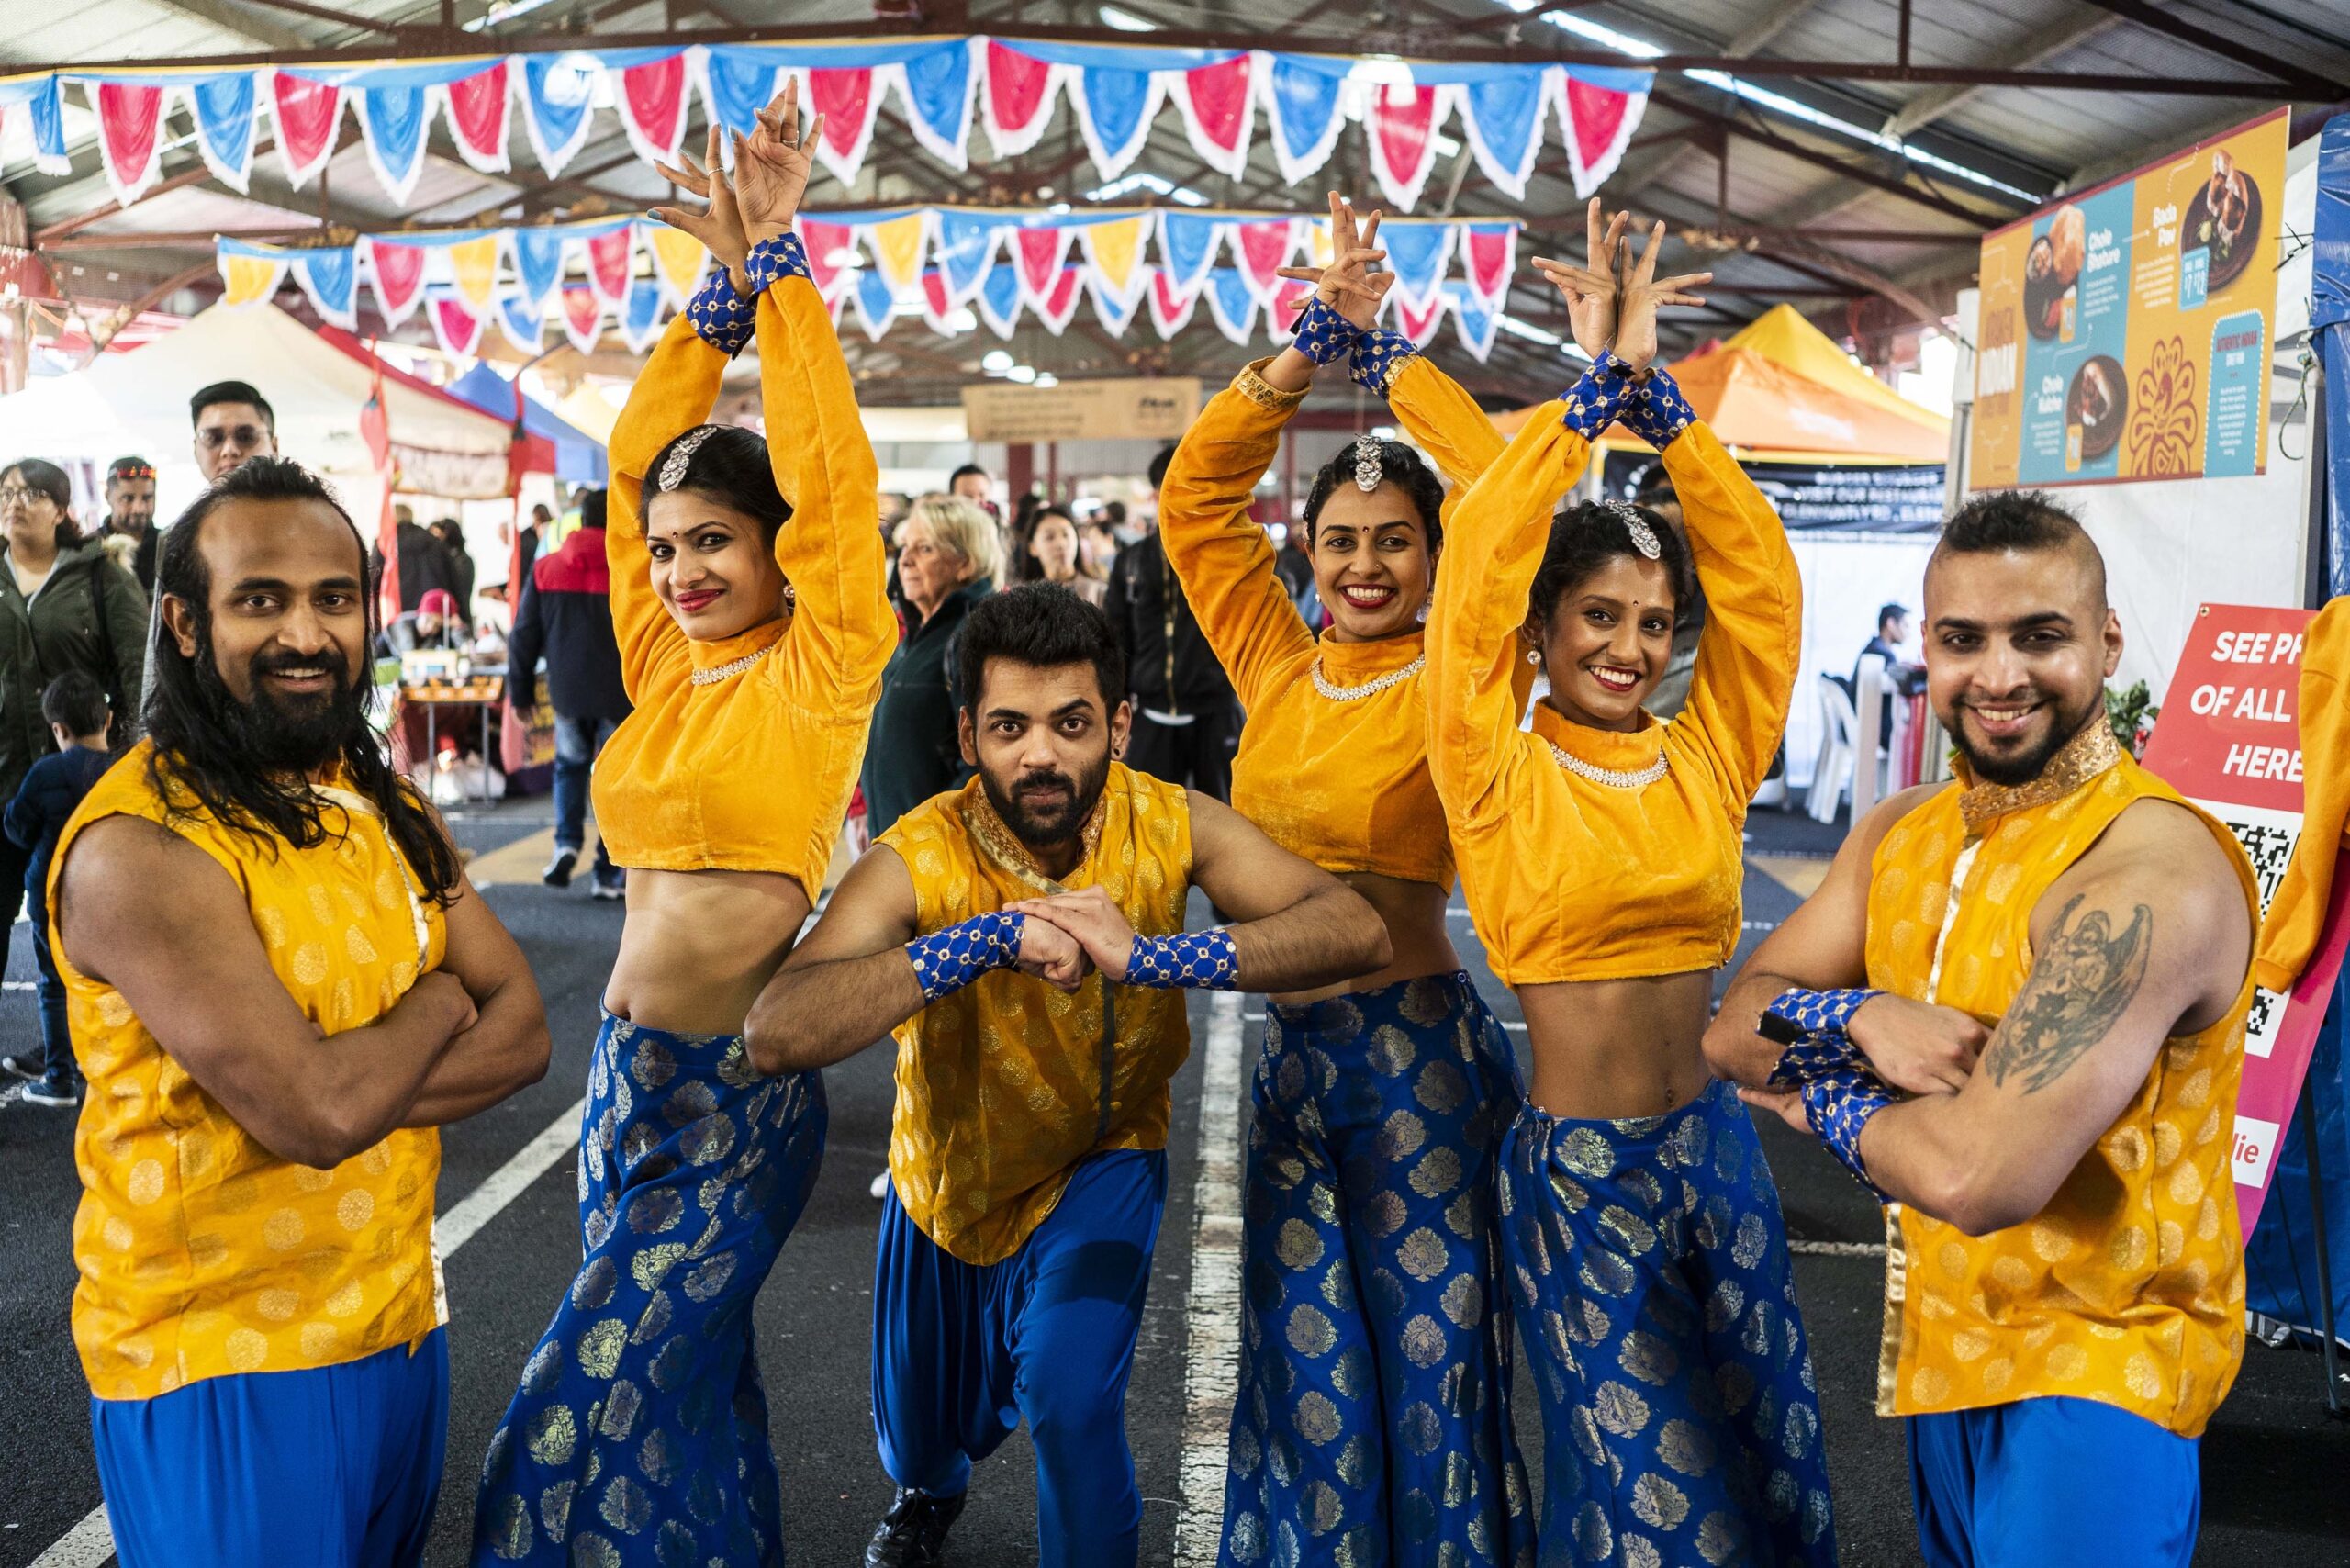 Savour the Spices Indian Festival returns to Queen Vic market